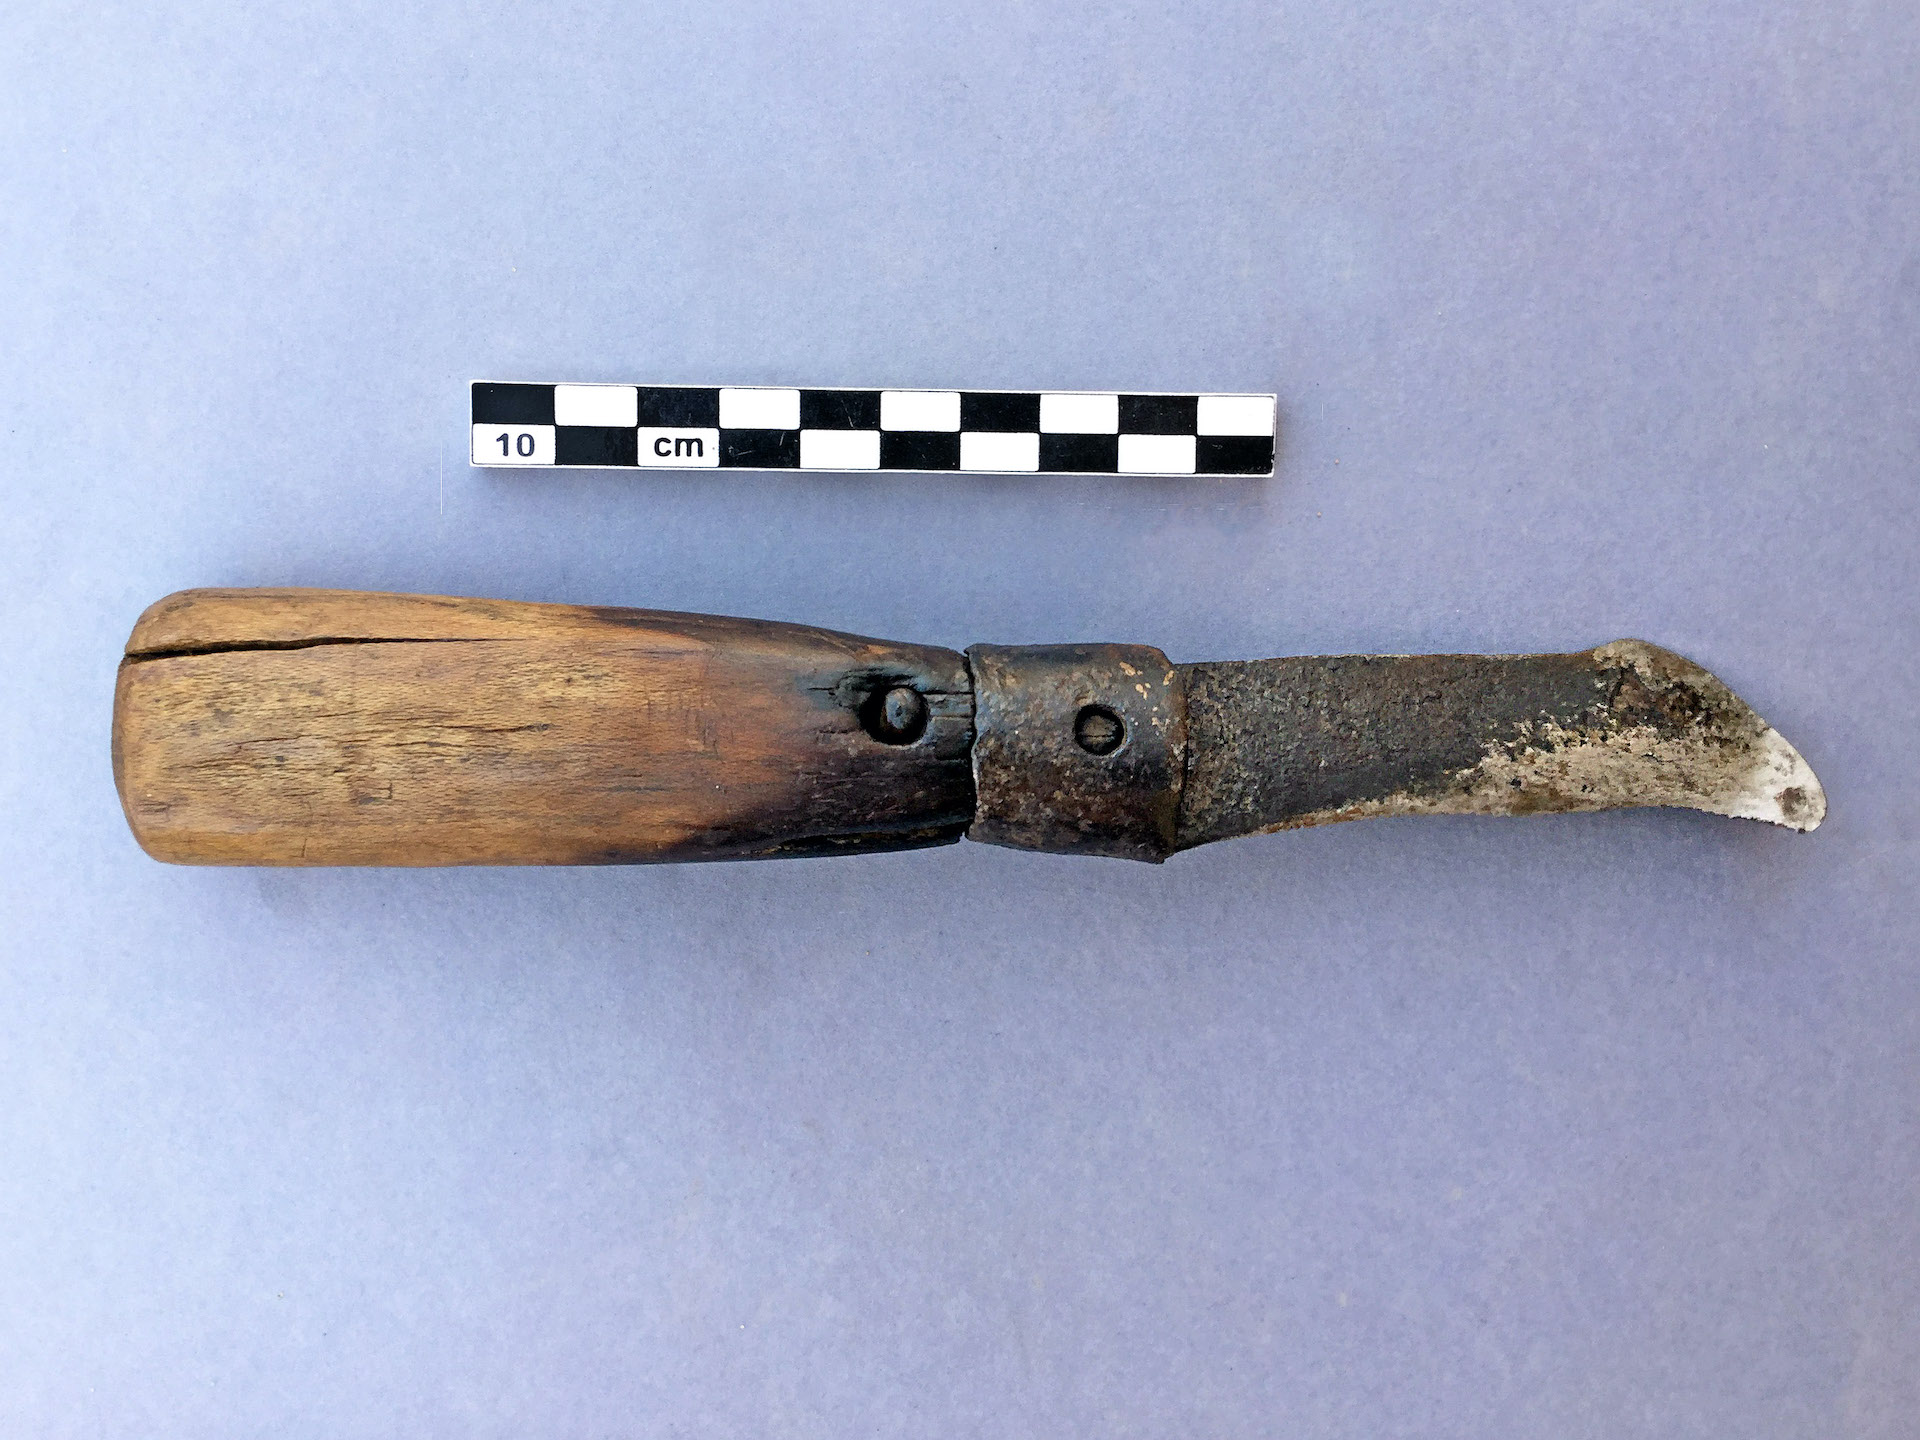 A knife with an iron blade and wooden handle was among the finds, and the researchers think it may have been used by ancient robbers to cut the bandages of the mummies.